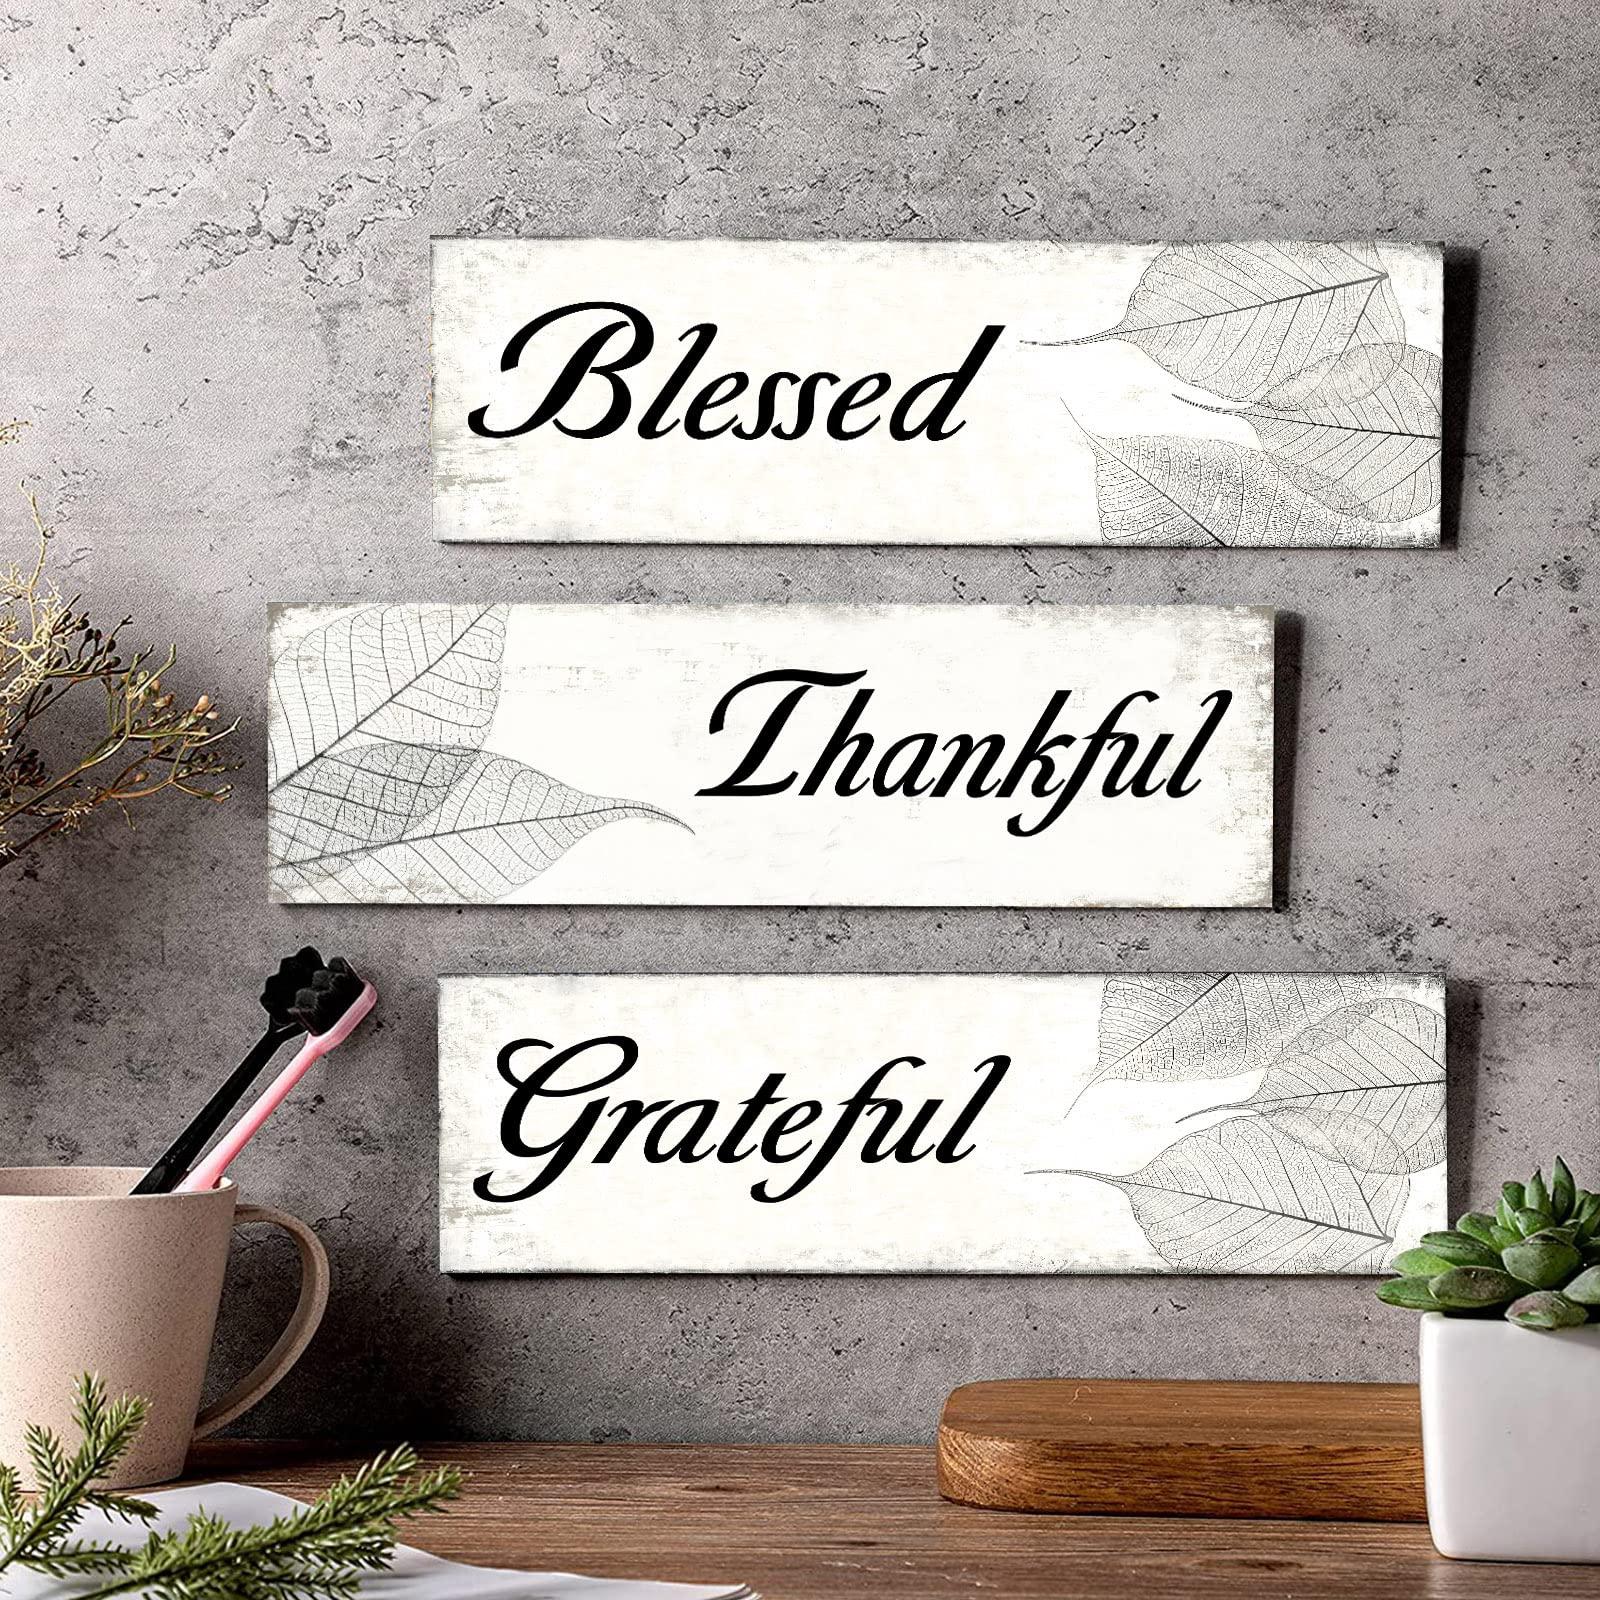 3 Pieces Grateful Thankful Blessed Wood Hanging Wall Art Rustic Wooden Wall Sign Decorations Positive Word Wall Plaque Leaves Prints Spring Summer Thanksgiving Day Wall Decor for Living Room Kitchen